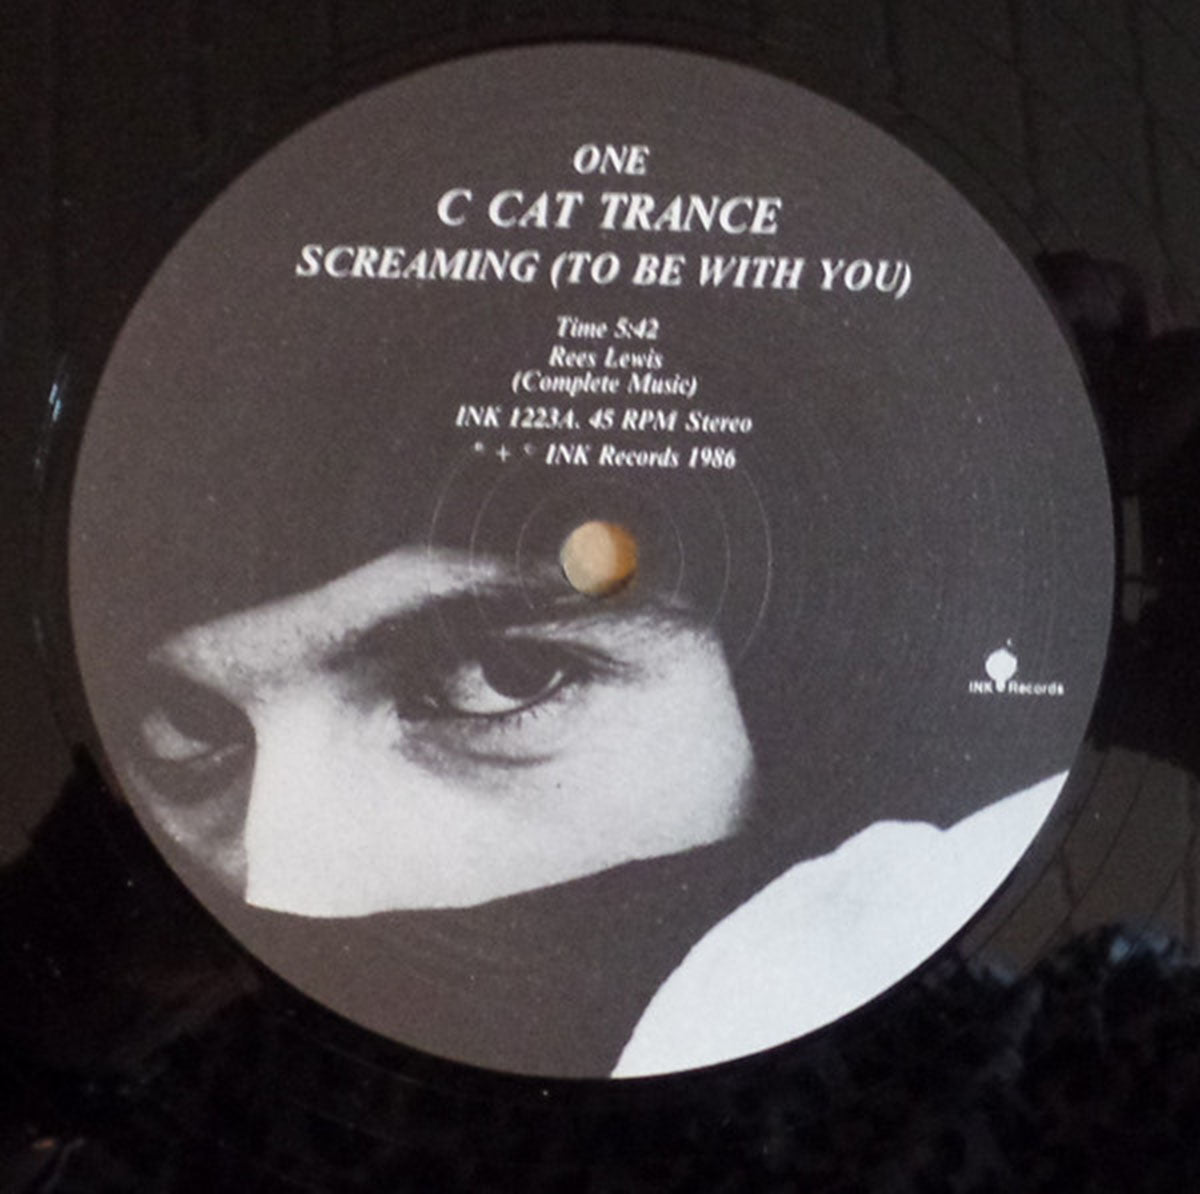 C Cat Trance ‎– Screaming (To Be With You) UK Pressing